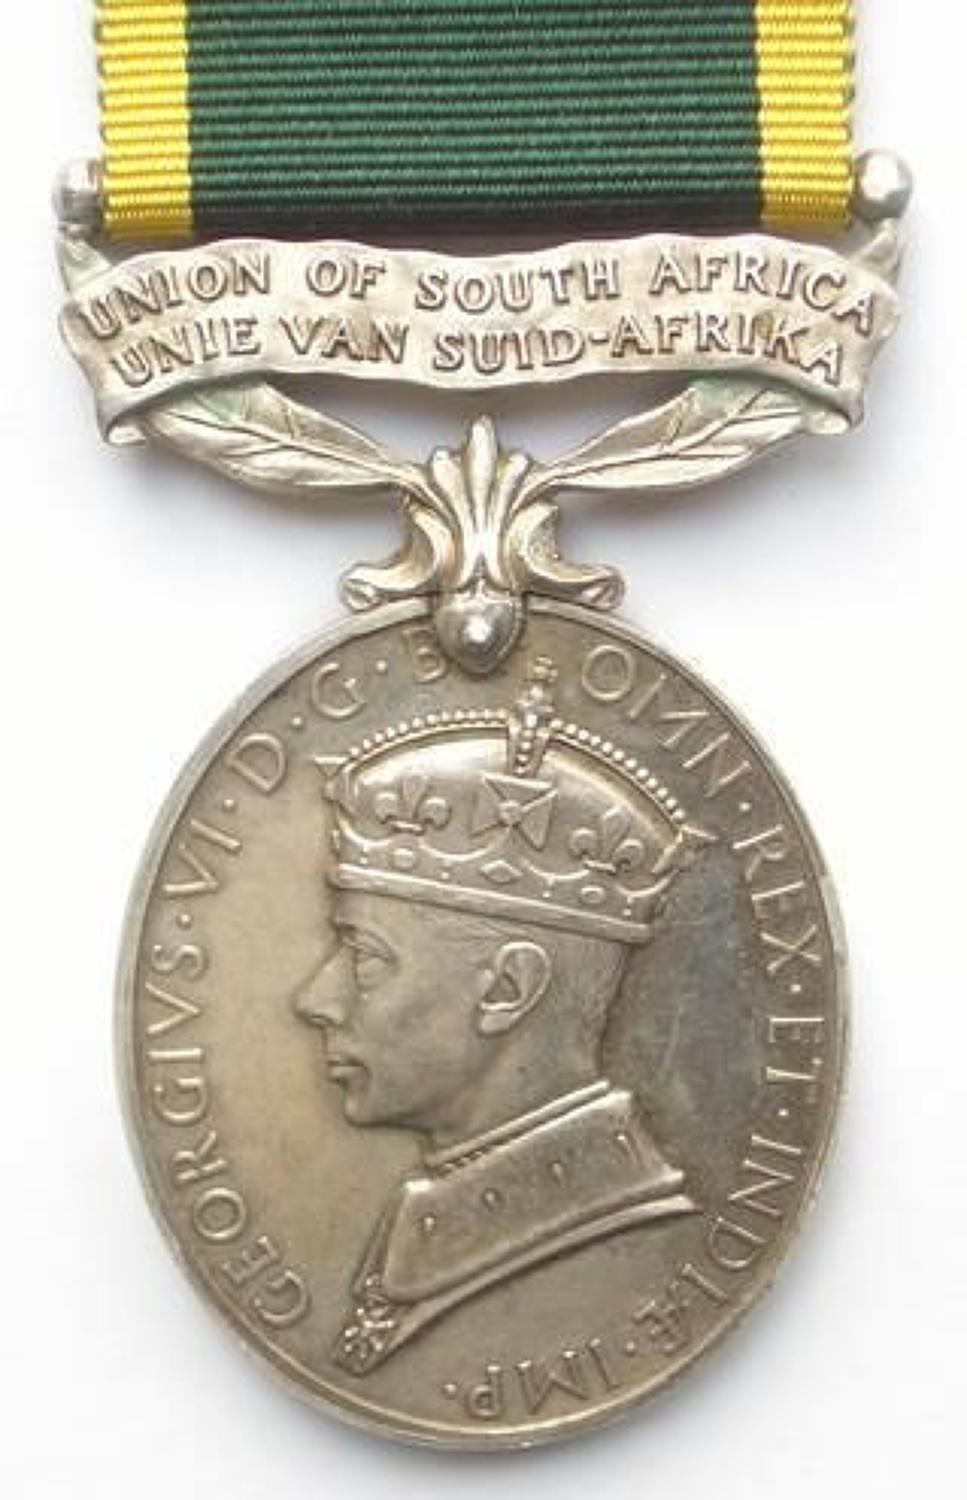 South African Armoured Corps Officer’s Efficiency Medal.